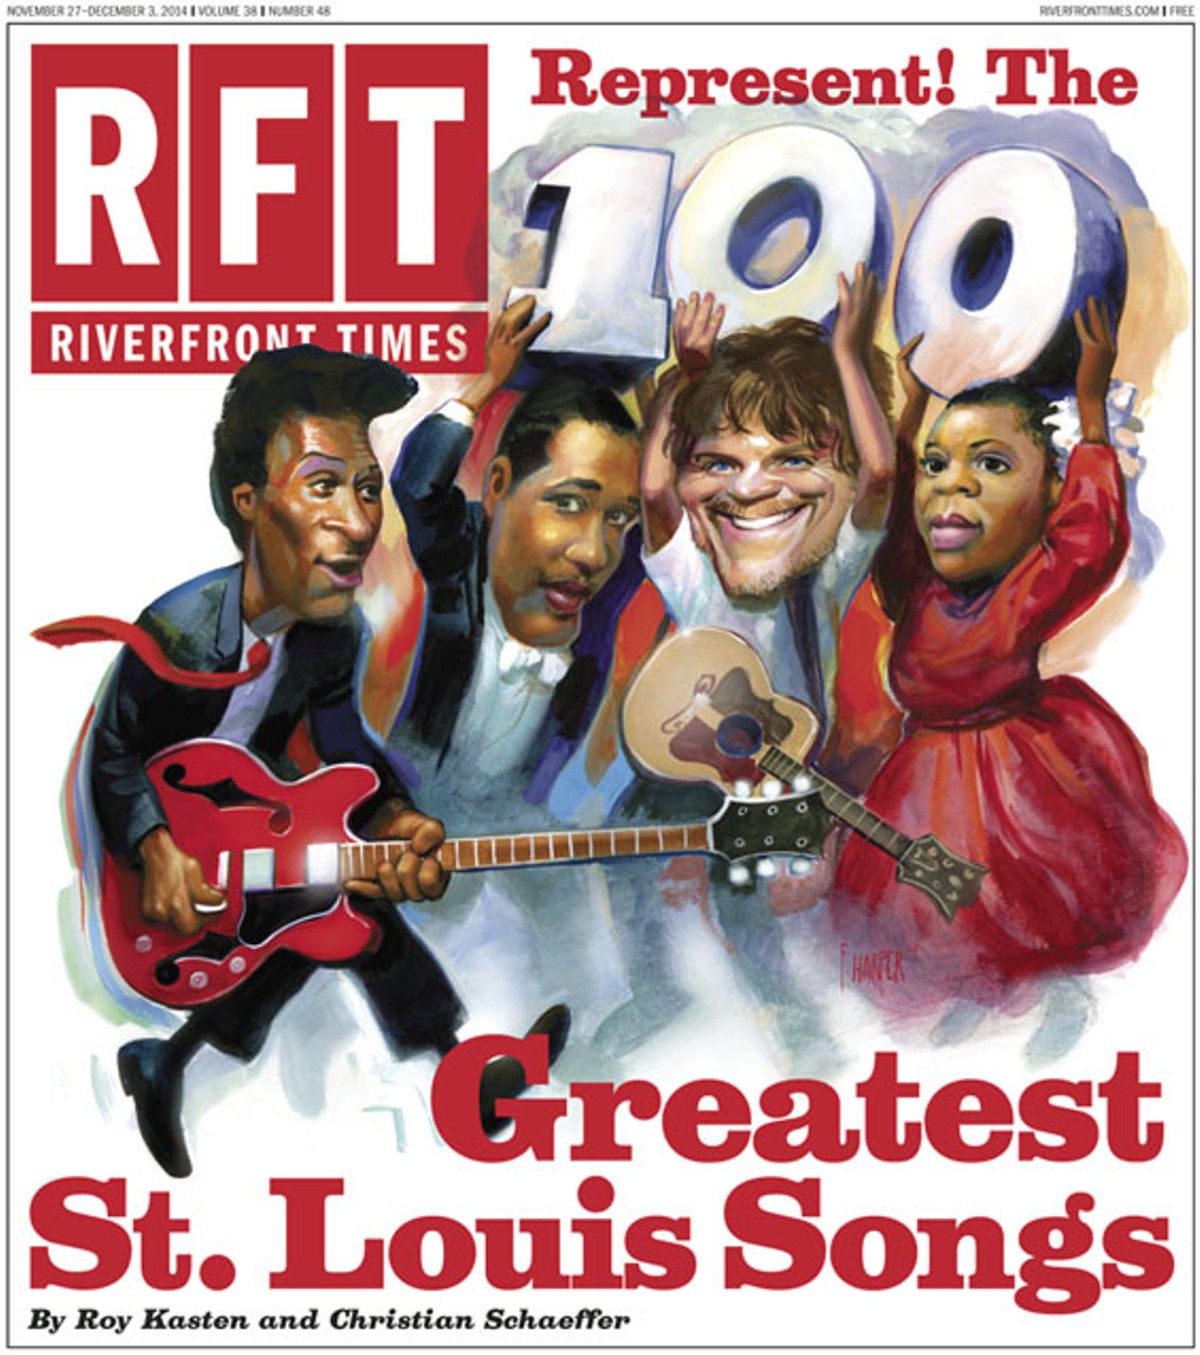 The Cover of the November 27 Print Edition